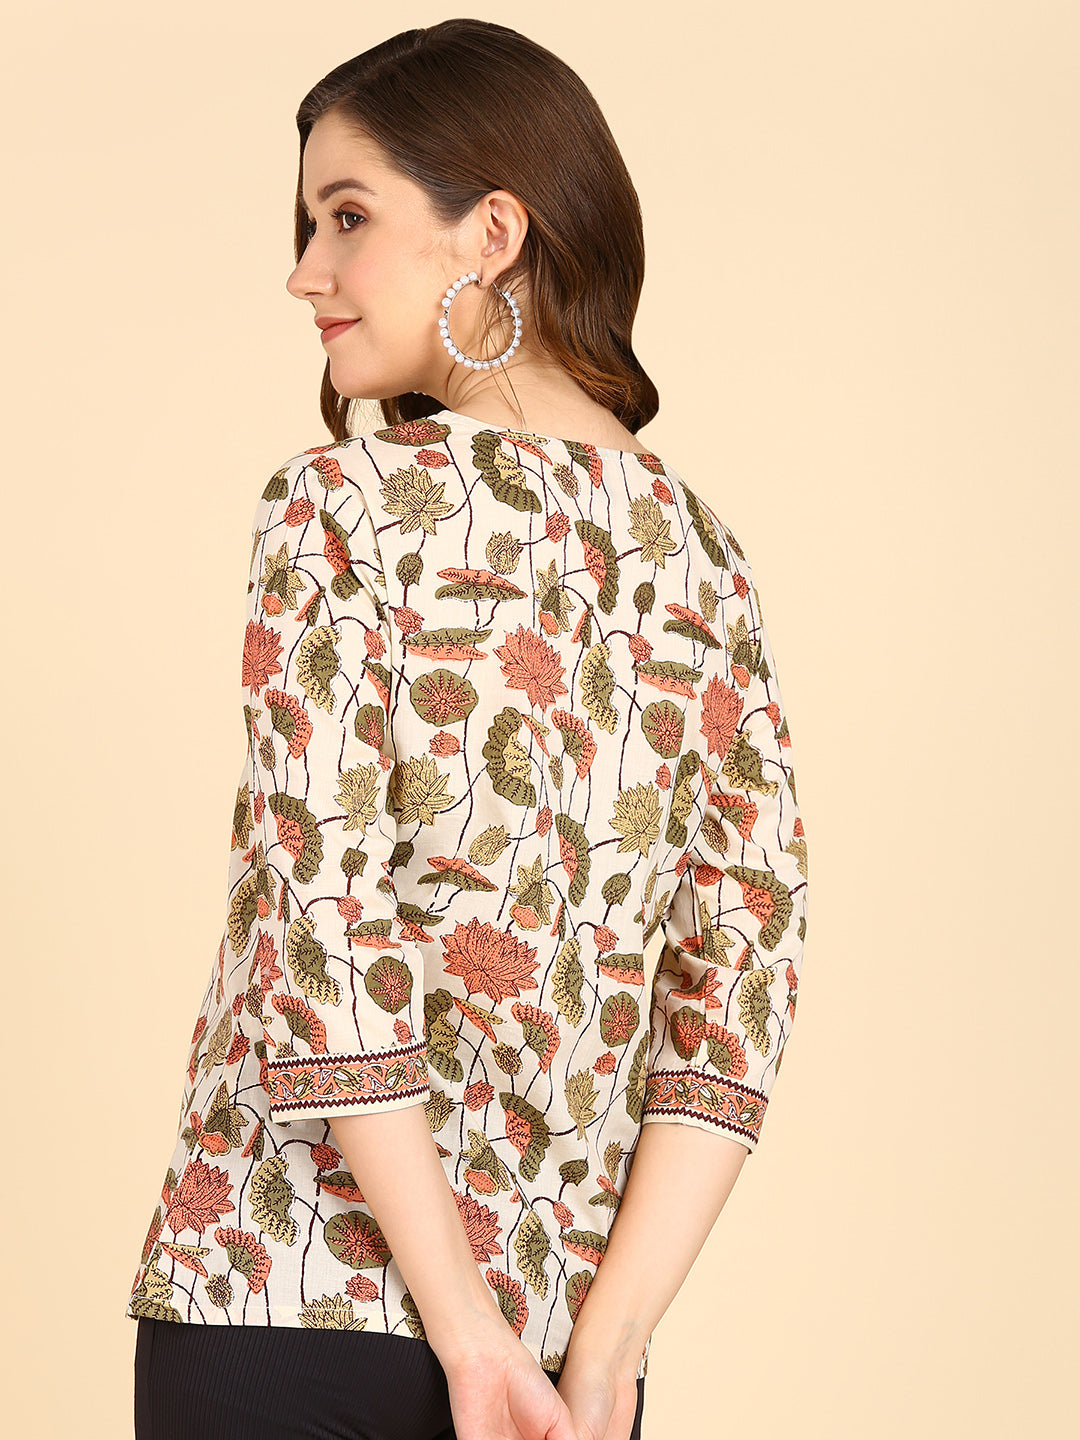 Floral Printed Cream Top With Front Border Deatails